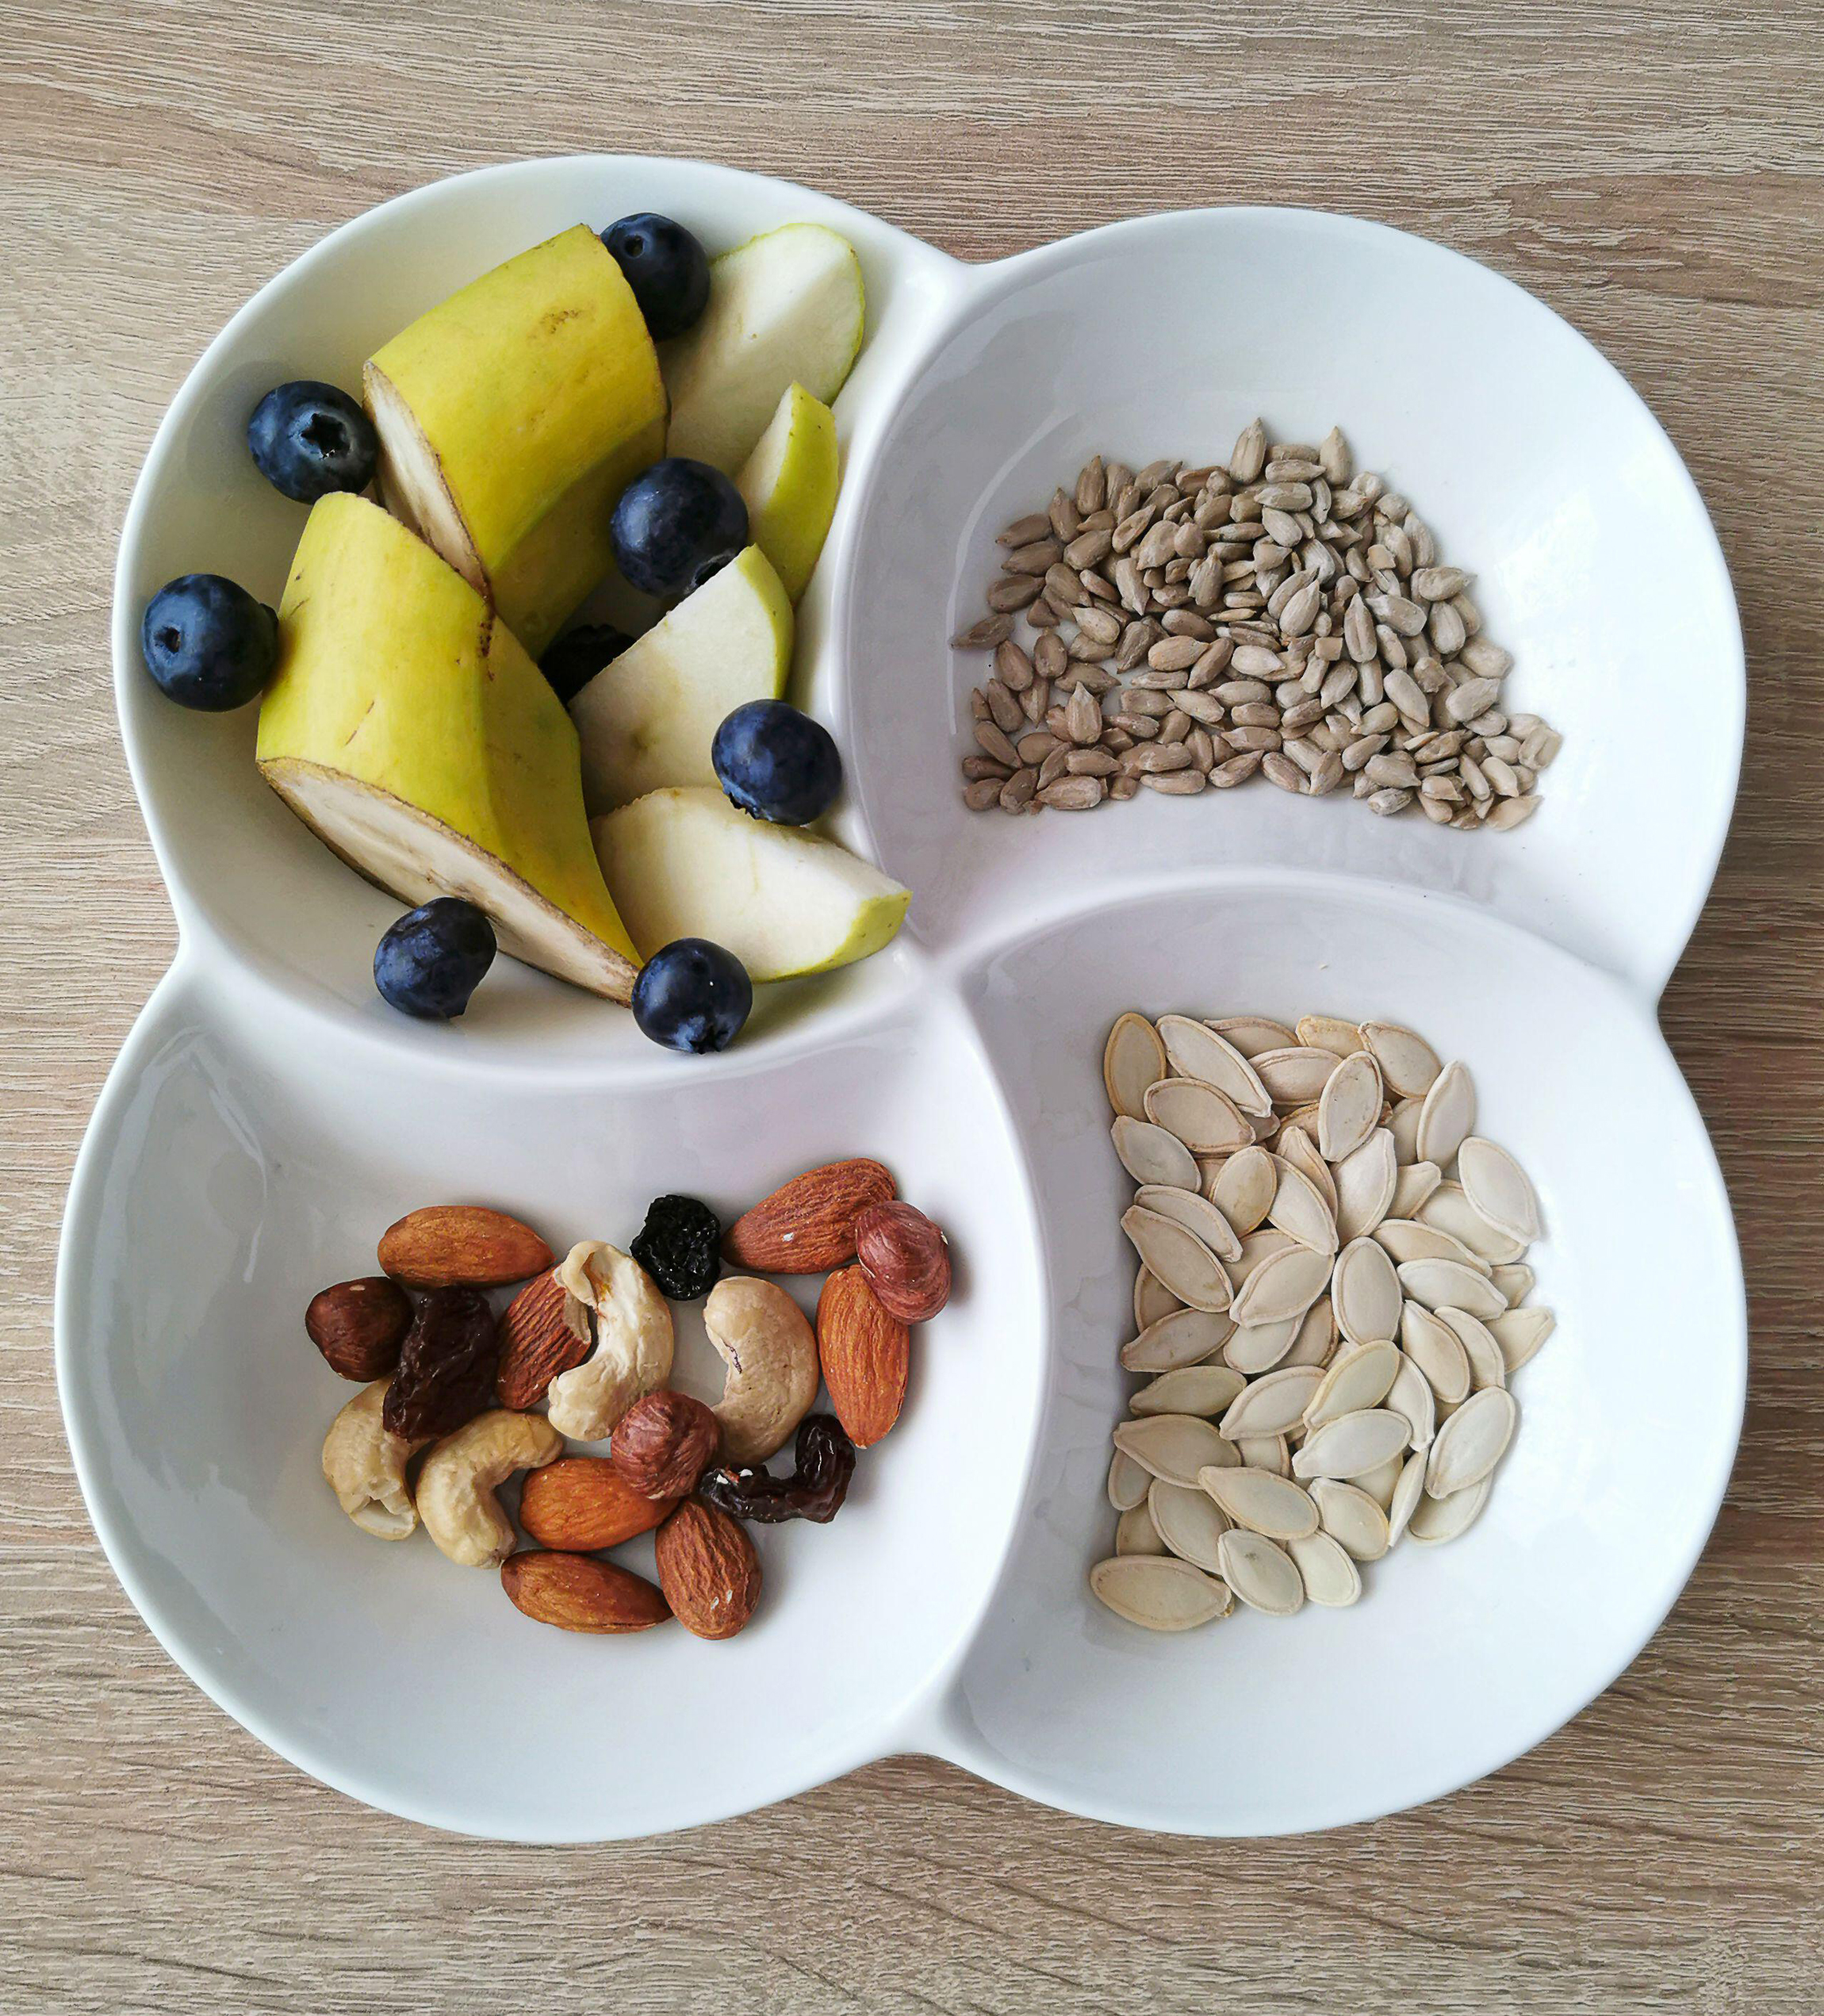 Banana pieces, nuts, sunflower and pumpkin seeds in a bowl